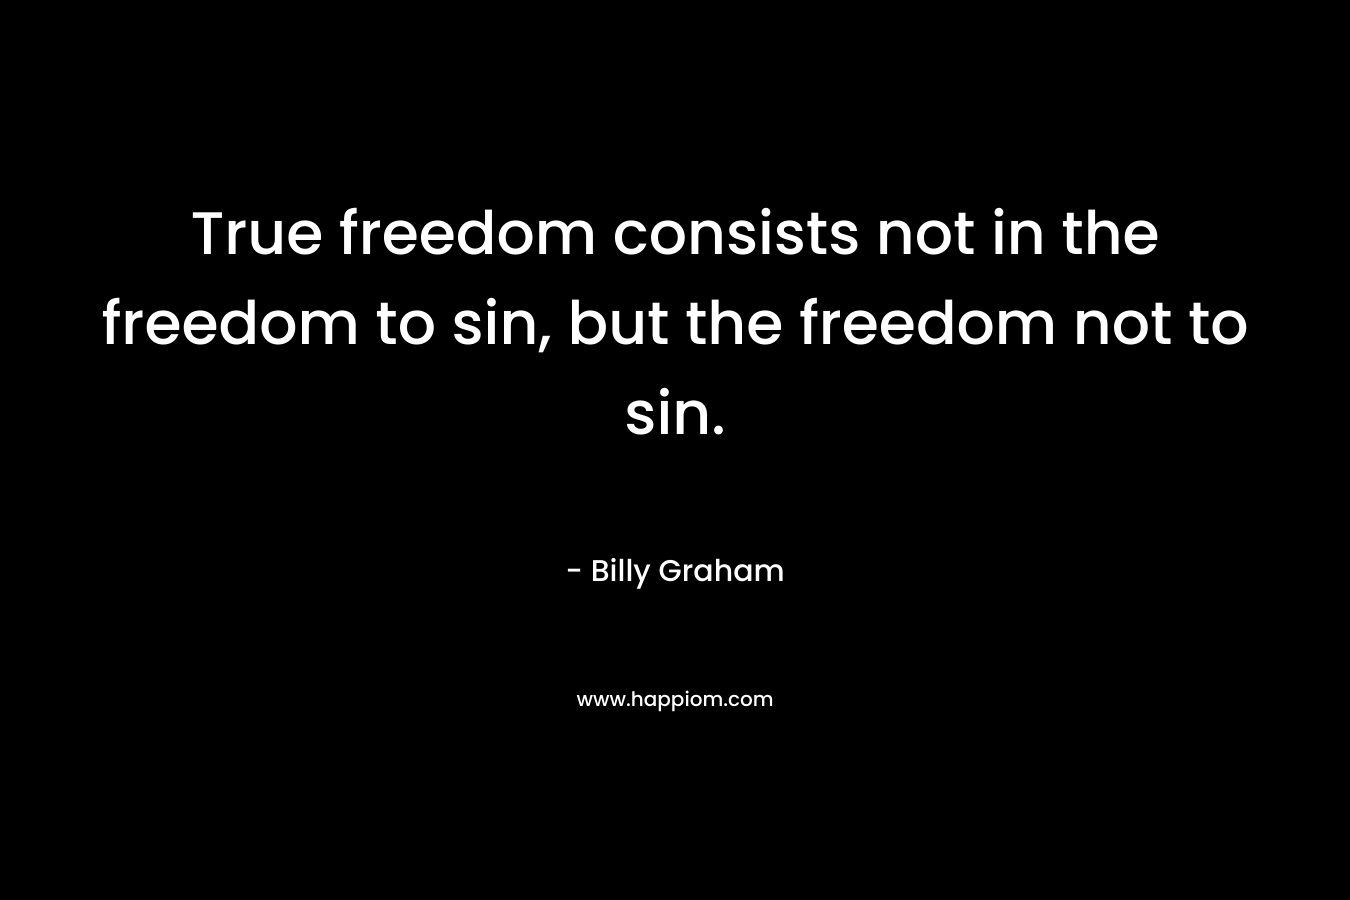 True freedom consists not in the freedom to sin, but the freedom not to sin.